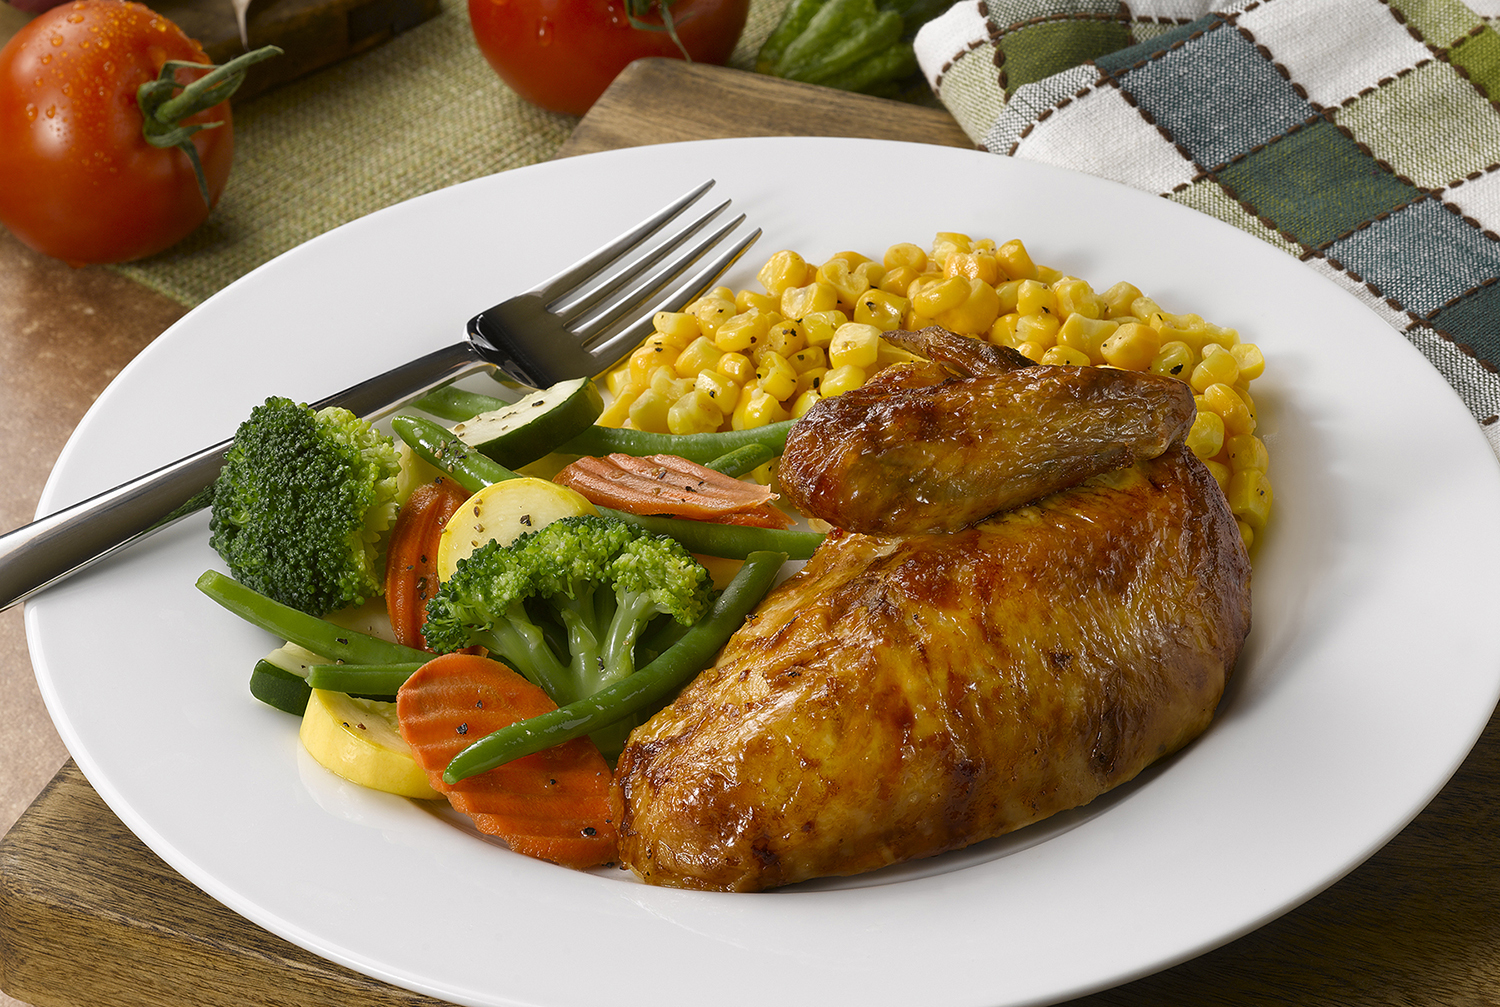 Boston Market Offers Health Conscious Consumers More Than 100 Meals